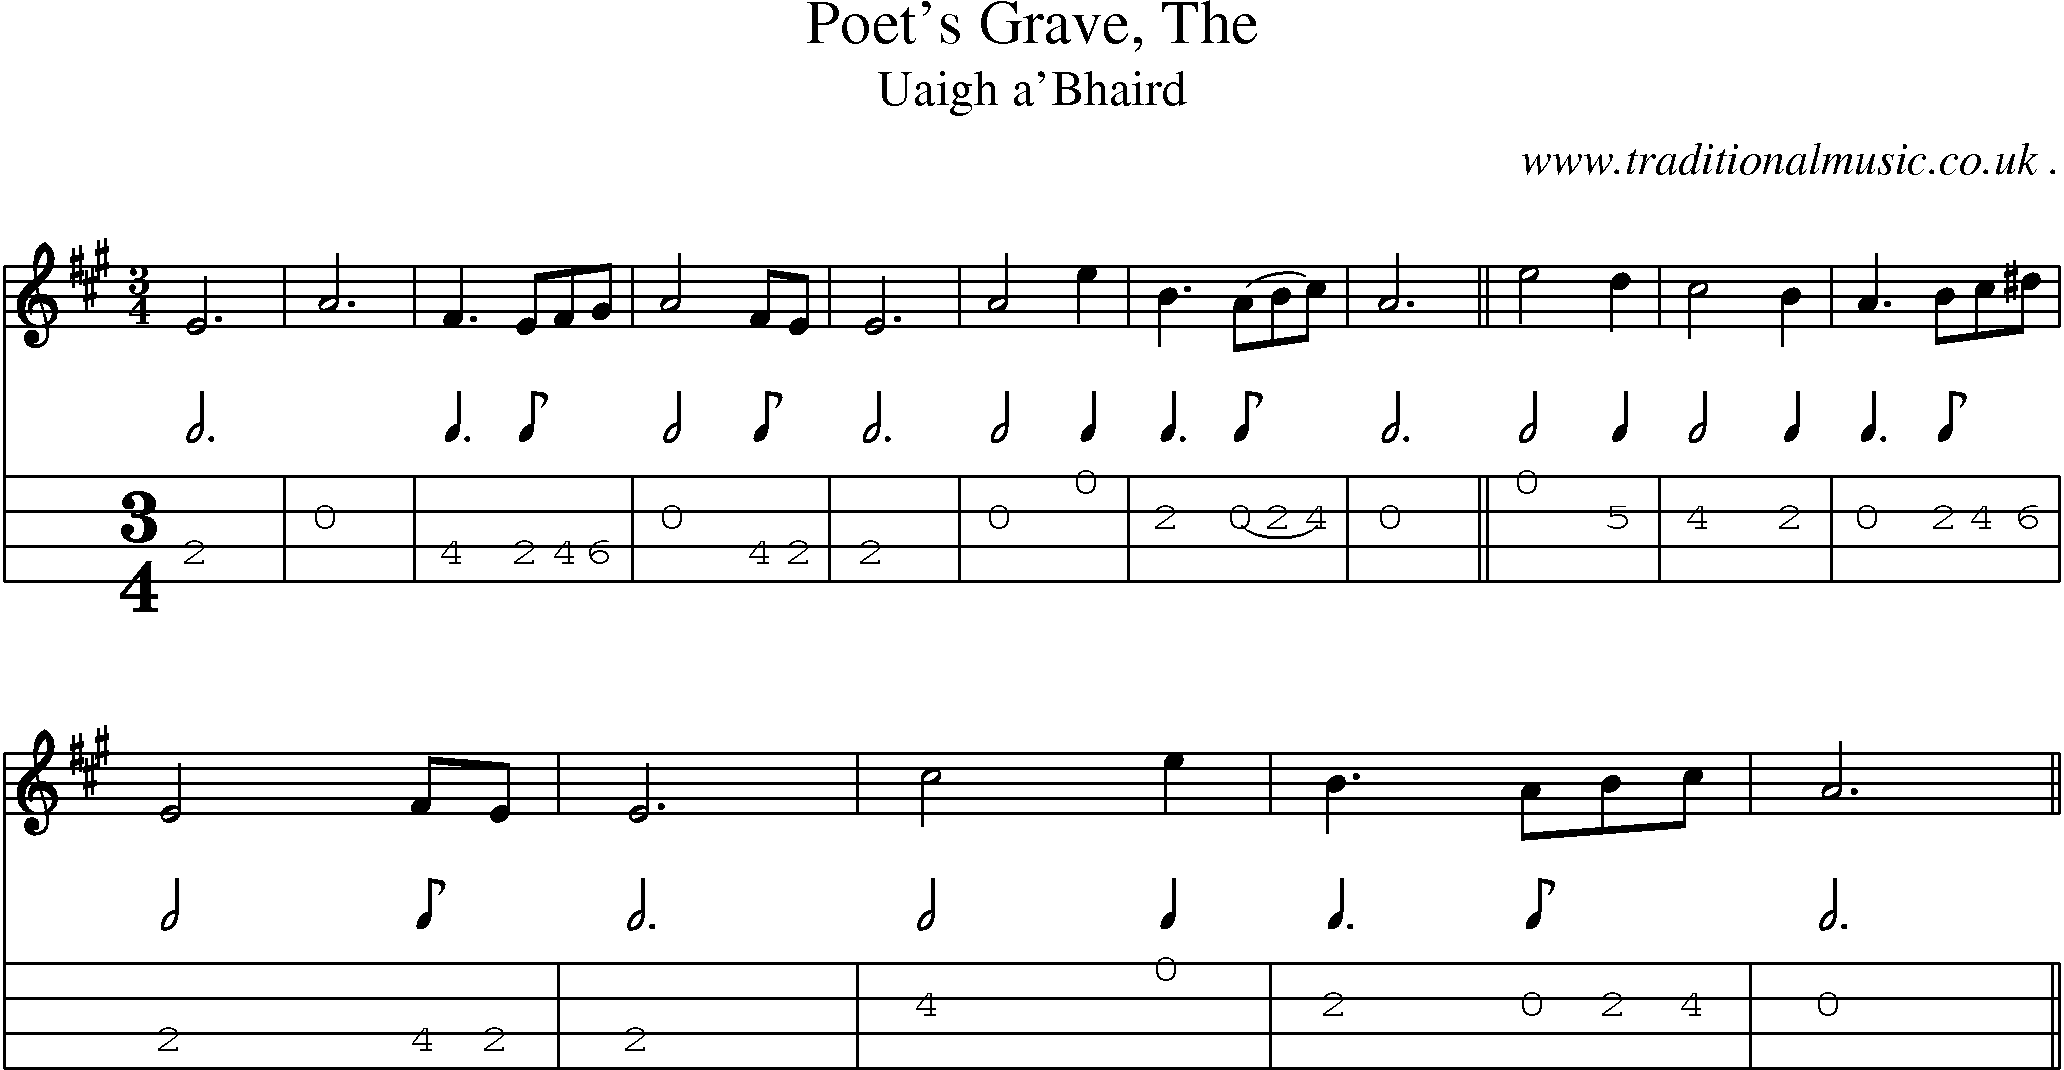 Sheet-music  score, Chords and Mandolin Tabs for Poets Grave The